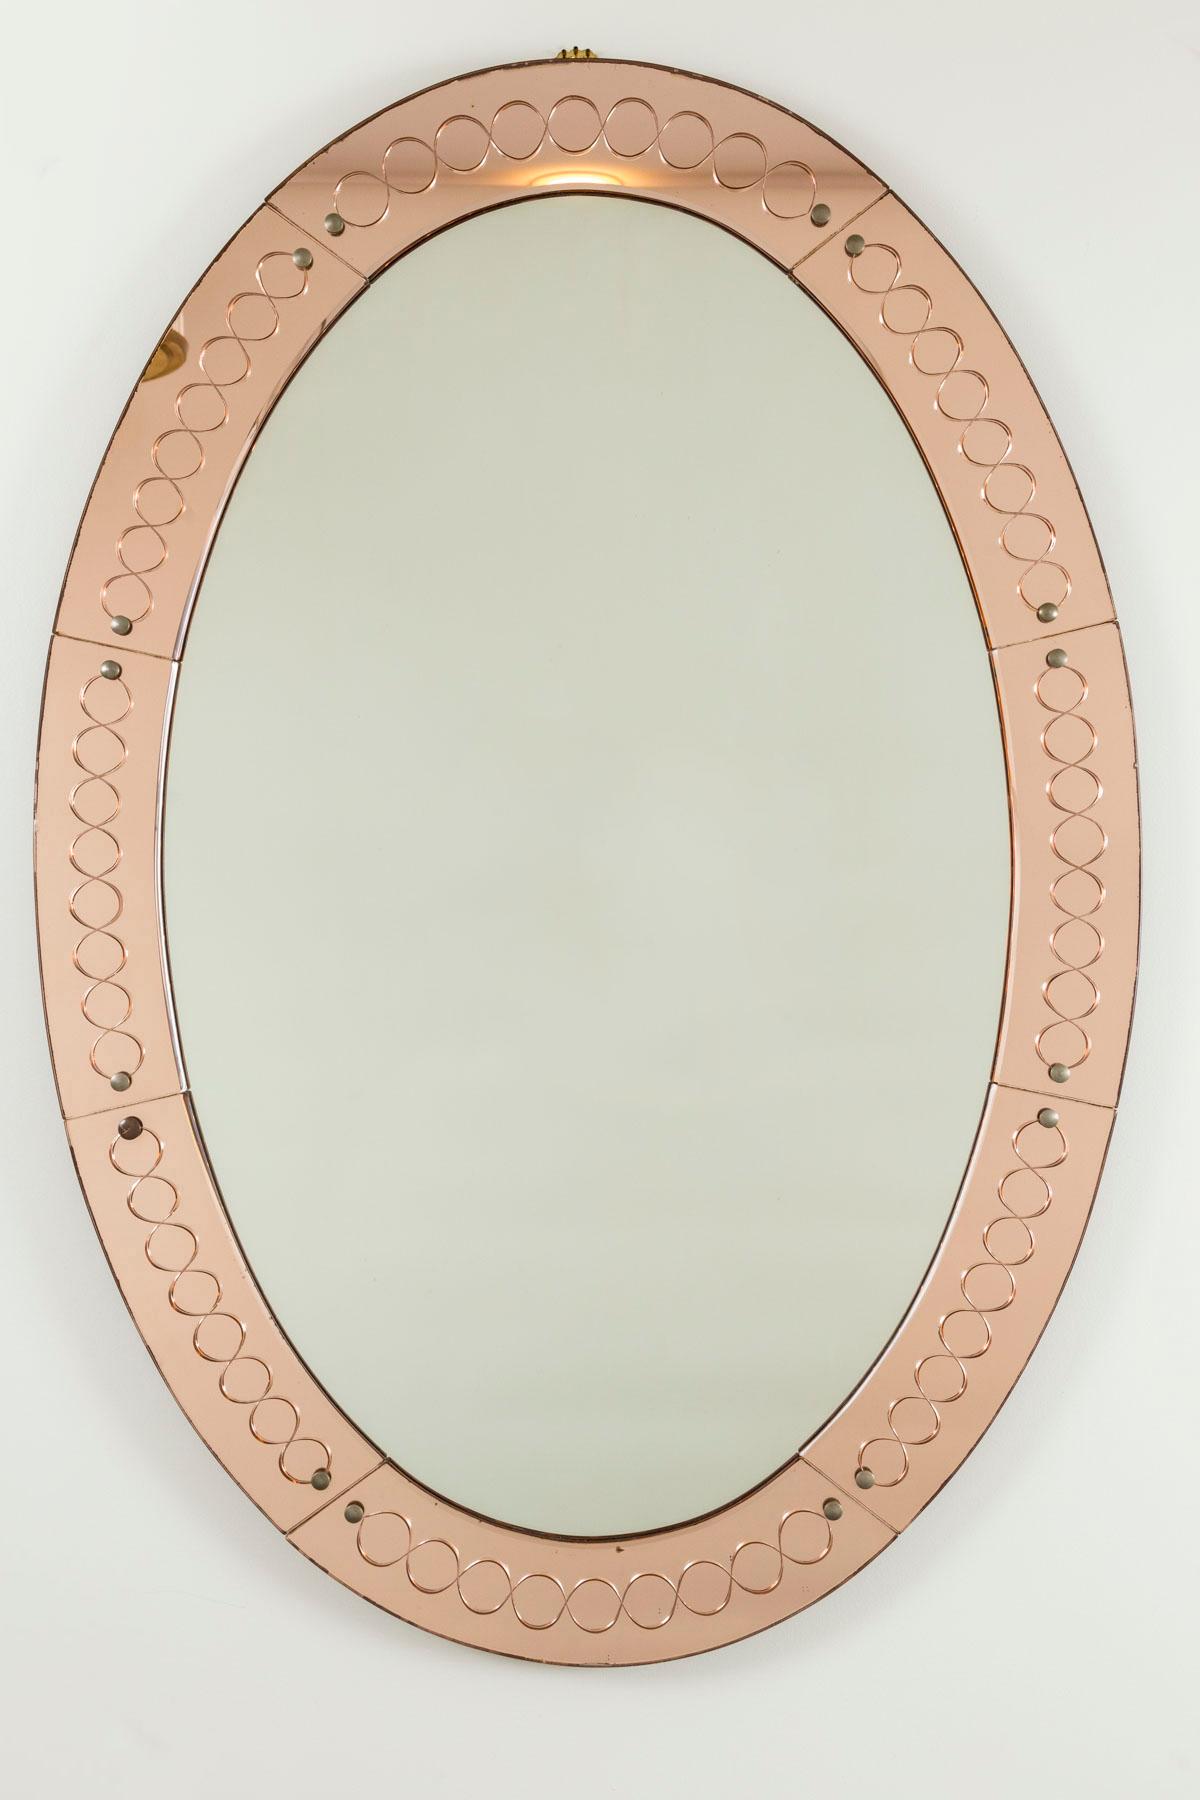 A very lovely large oval shaped mirror composed of segmented salmon colored glass etched with a unique and unfussy continuous circular design
Dating: 1940-1950ca
Origin: Italy
Condition: Very Good Vintage condition with signs of time but without